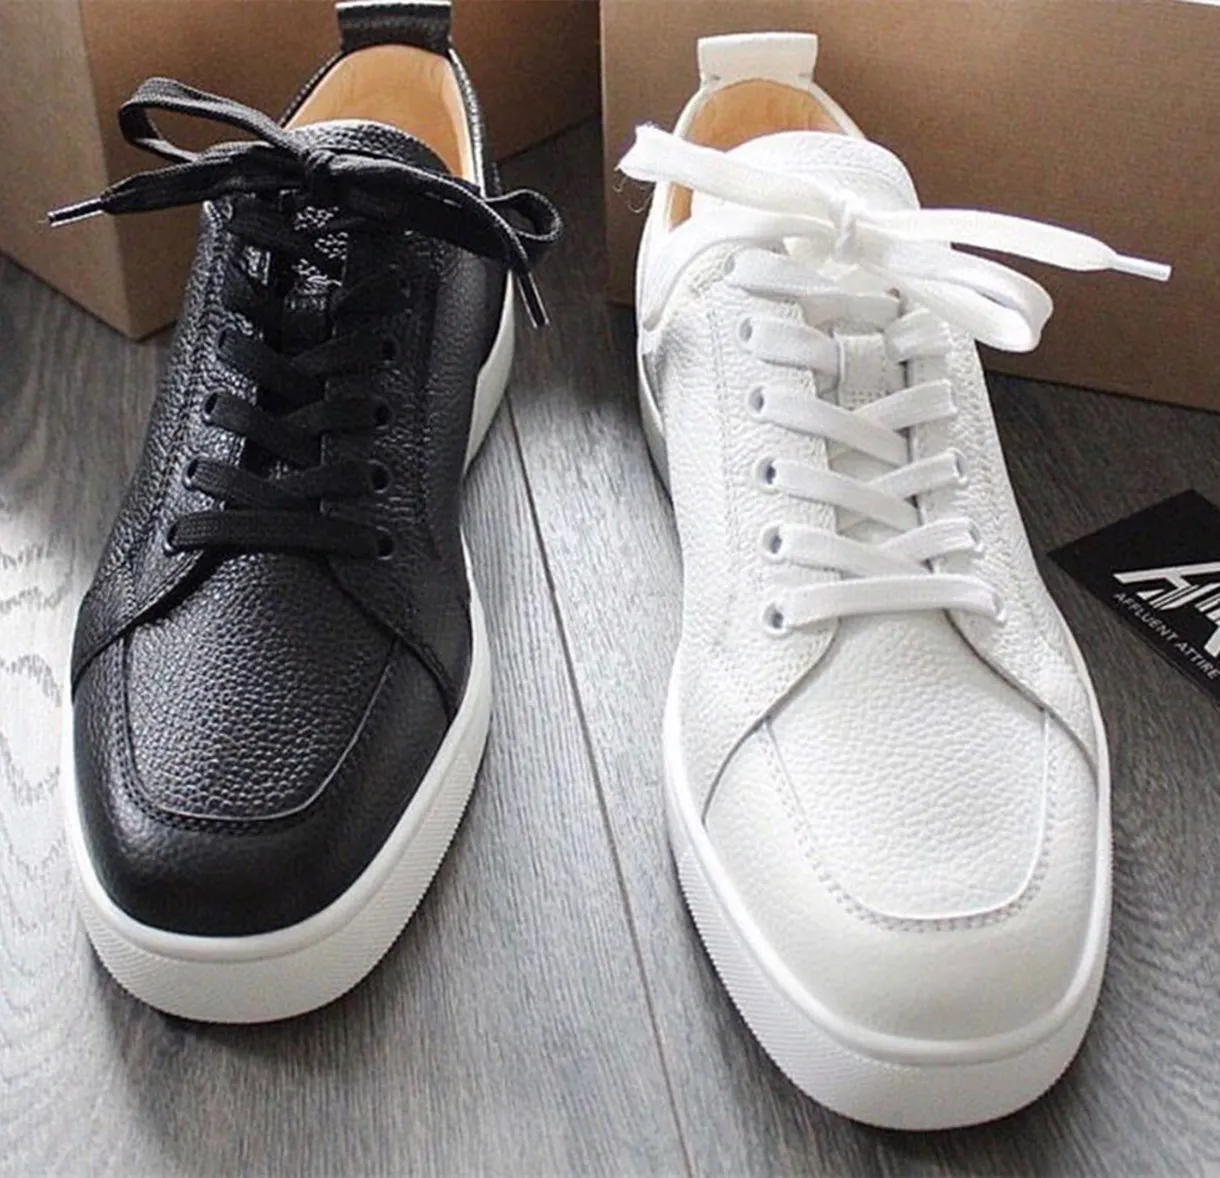 High Quality Brands White Black Leather Rantulow Casual Shoes junior spikes Men Women Flat Luxurious Low Top Red soles Sneakers With Box